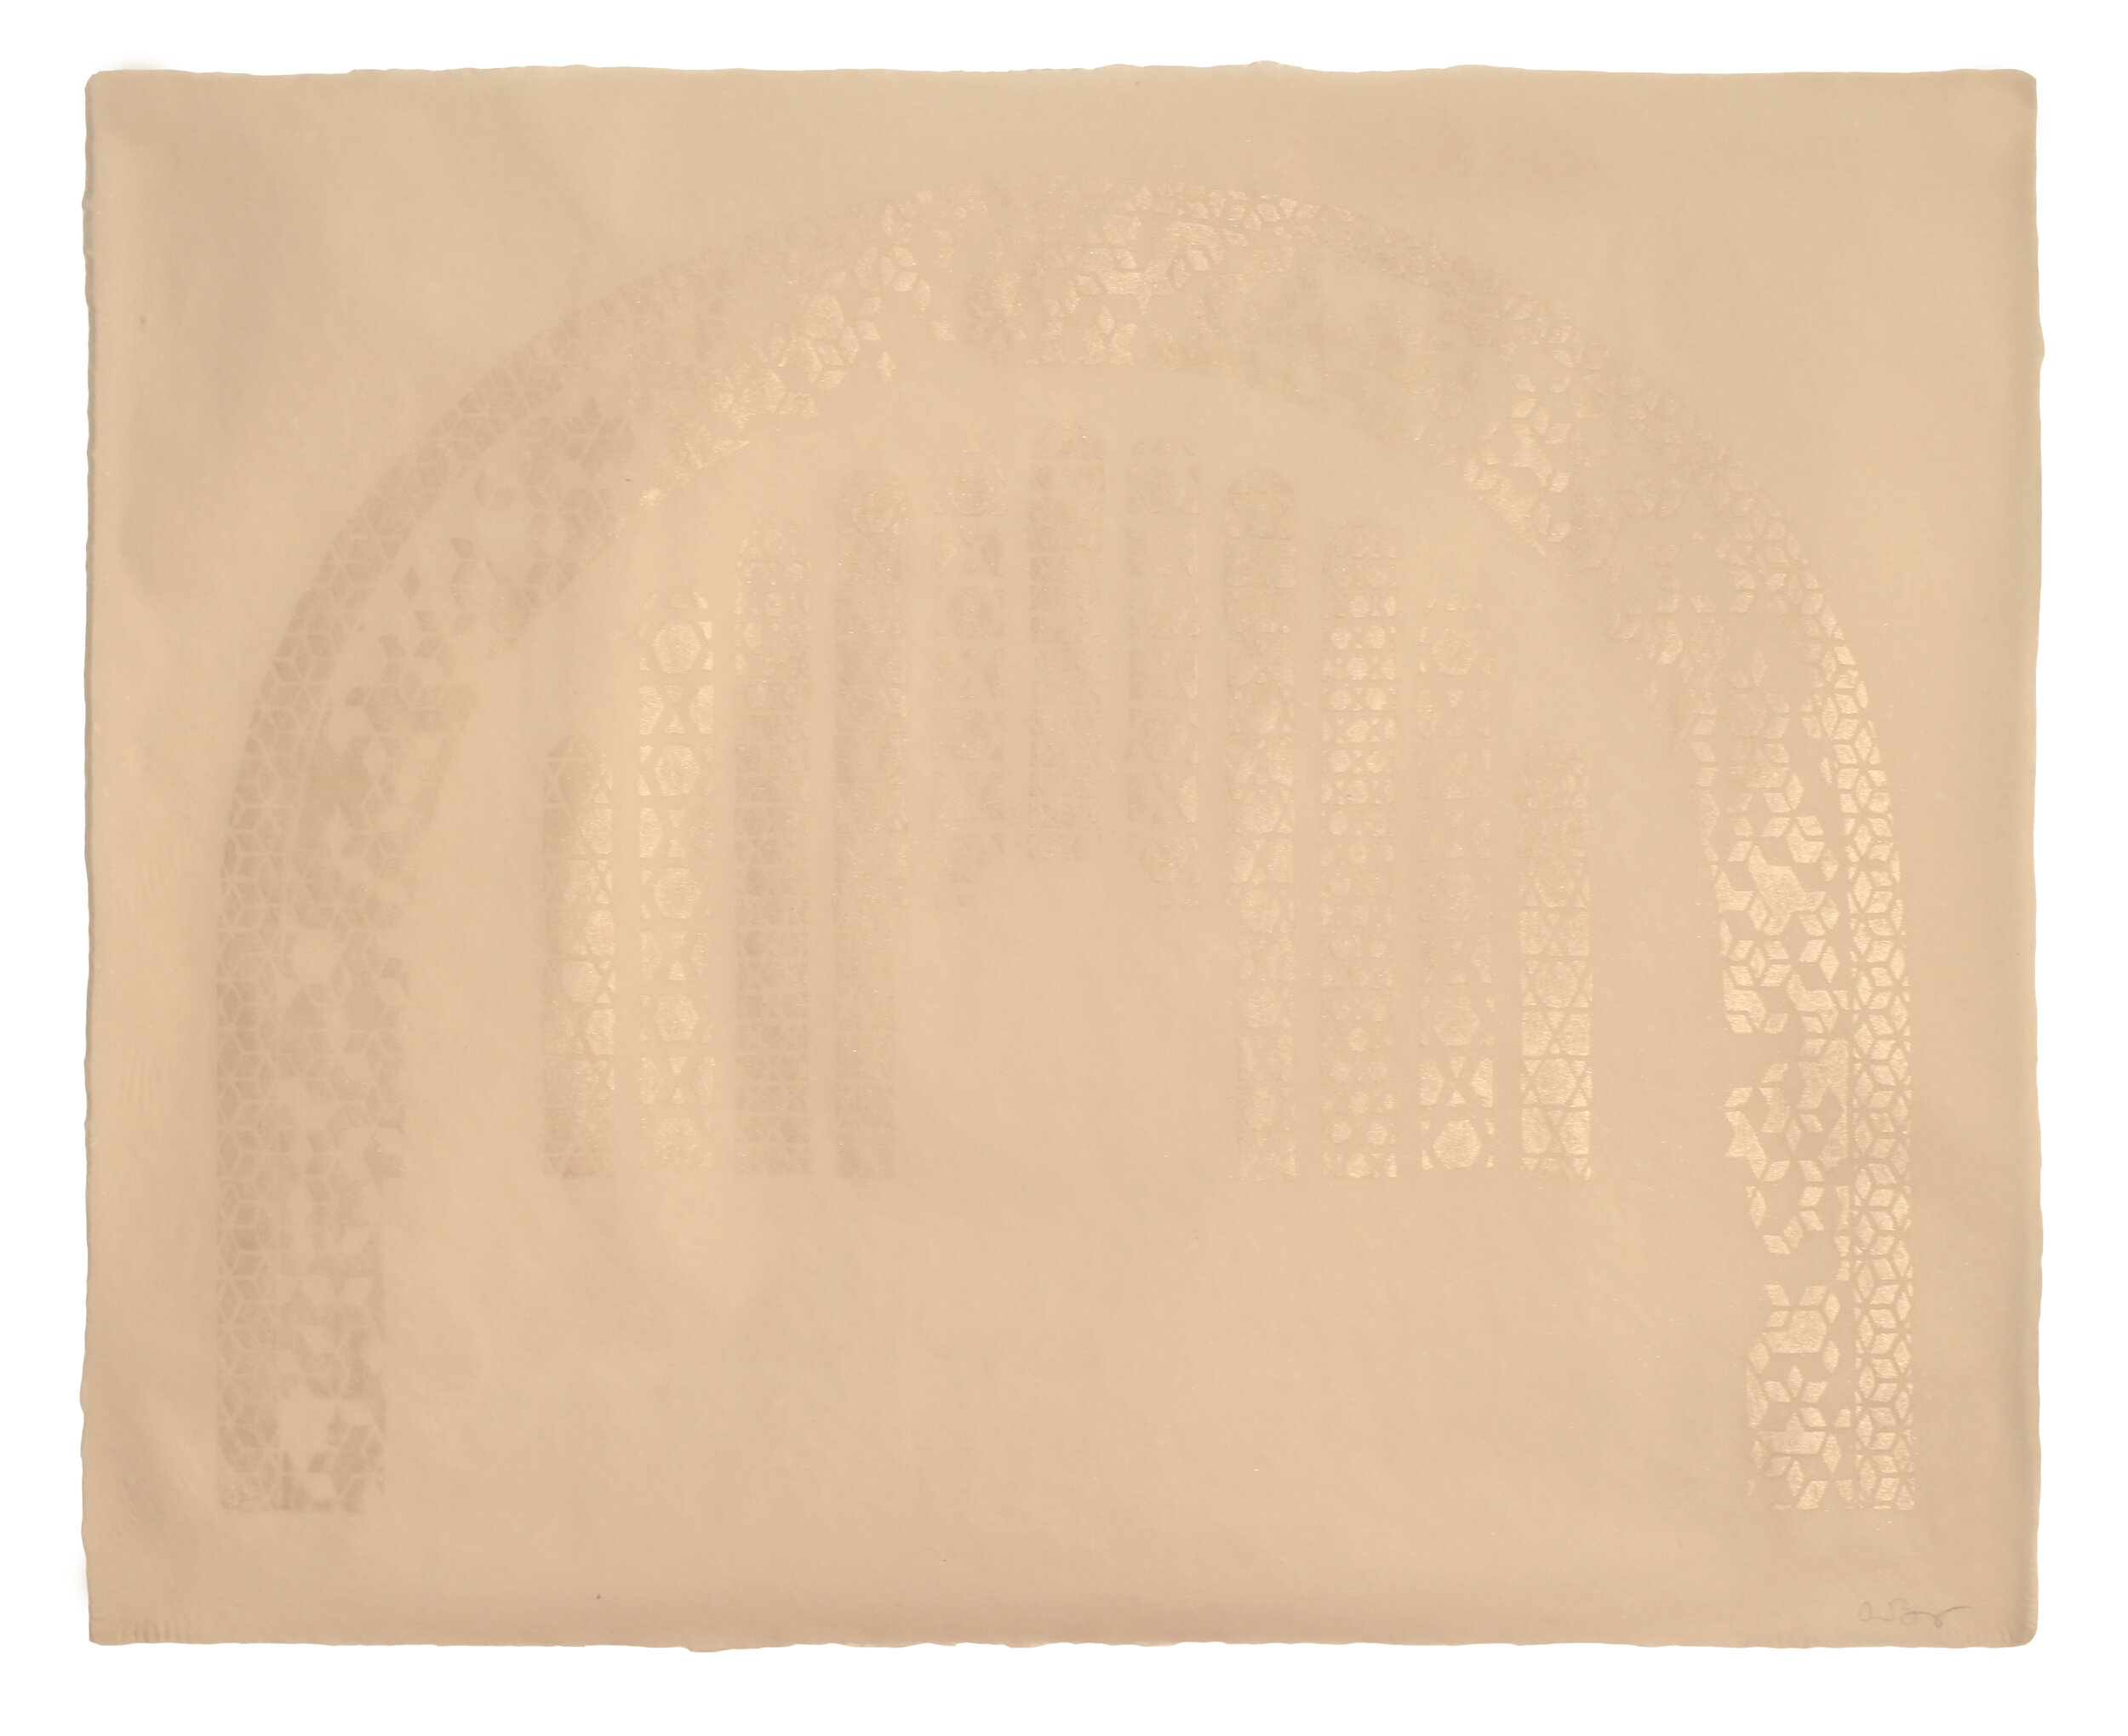  Anna Hendrick Karpatkin Benjamin,  Stephen Wise Free Synagogue  (stencil), 2018, Pigmented linen pulp paint on abaca base sheet, 16 x 19.75 inches.  